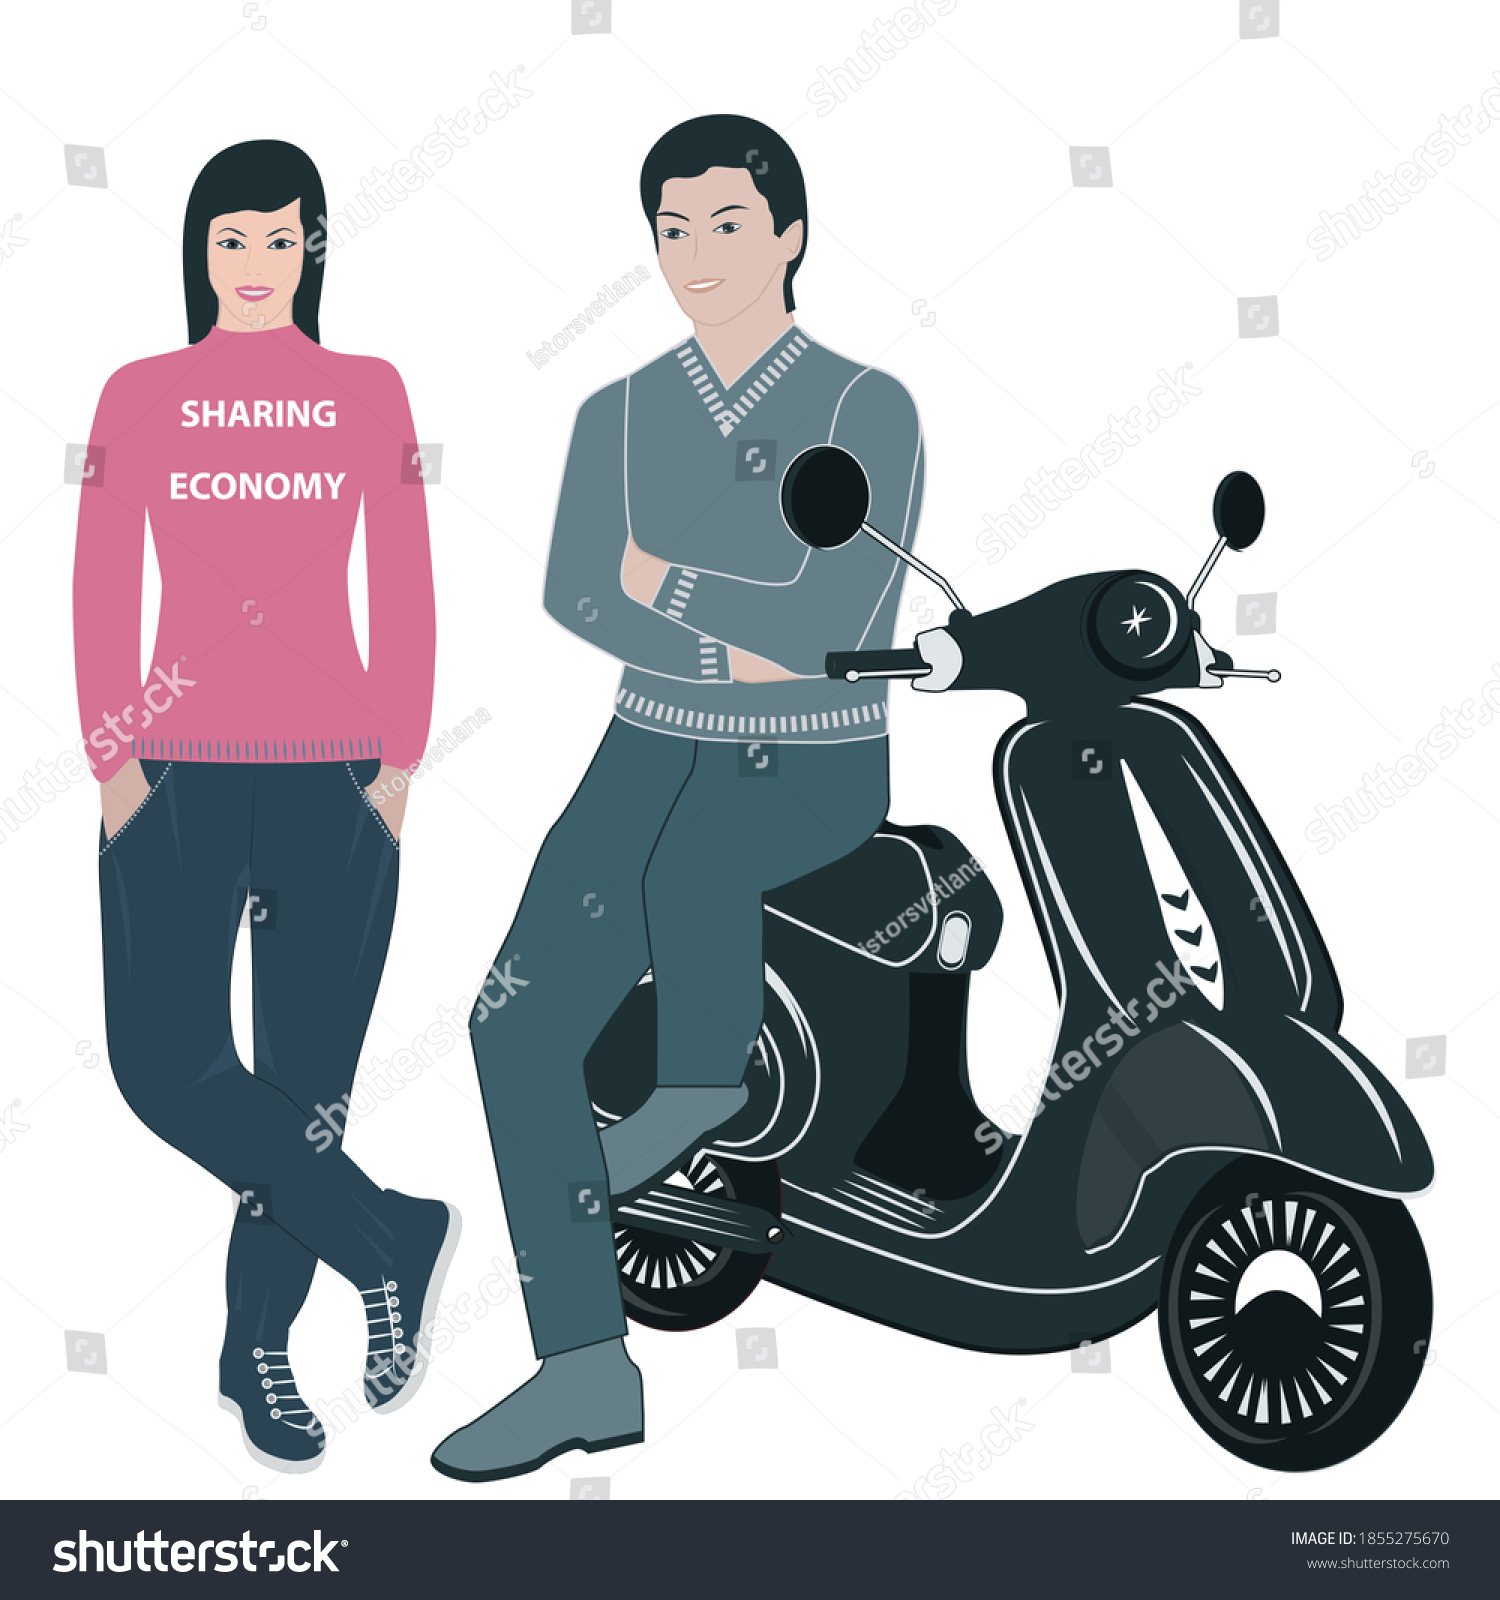 SVG of Scooter and owners man and woman. Vector illustration. Design concept. Sharing Economy. svg